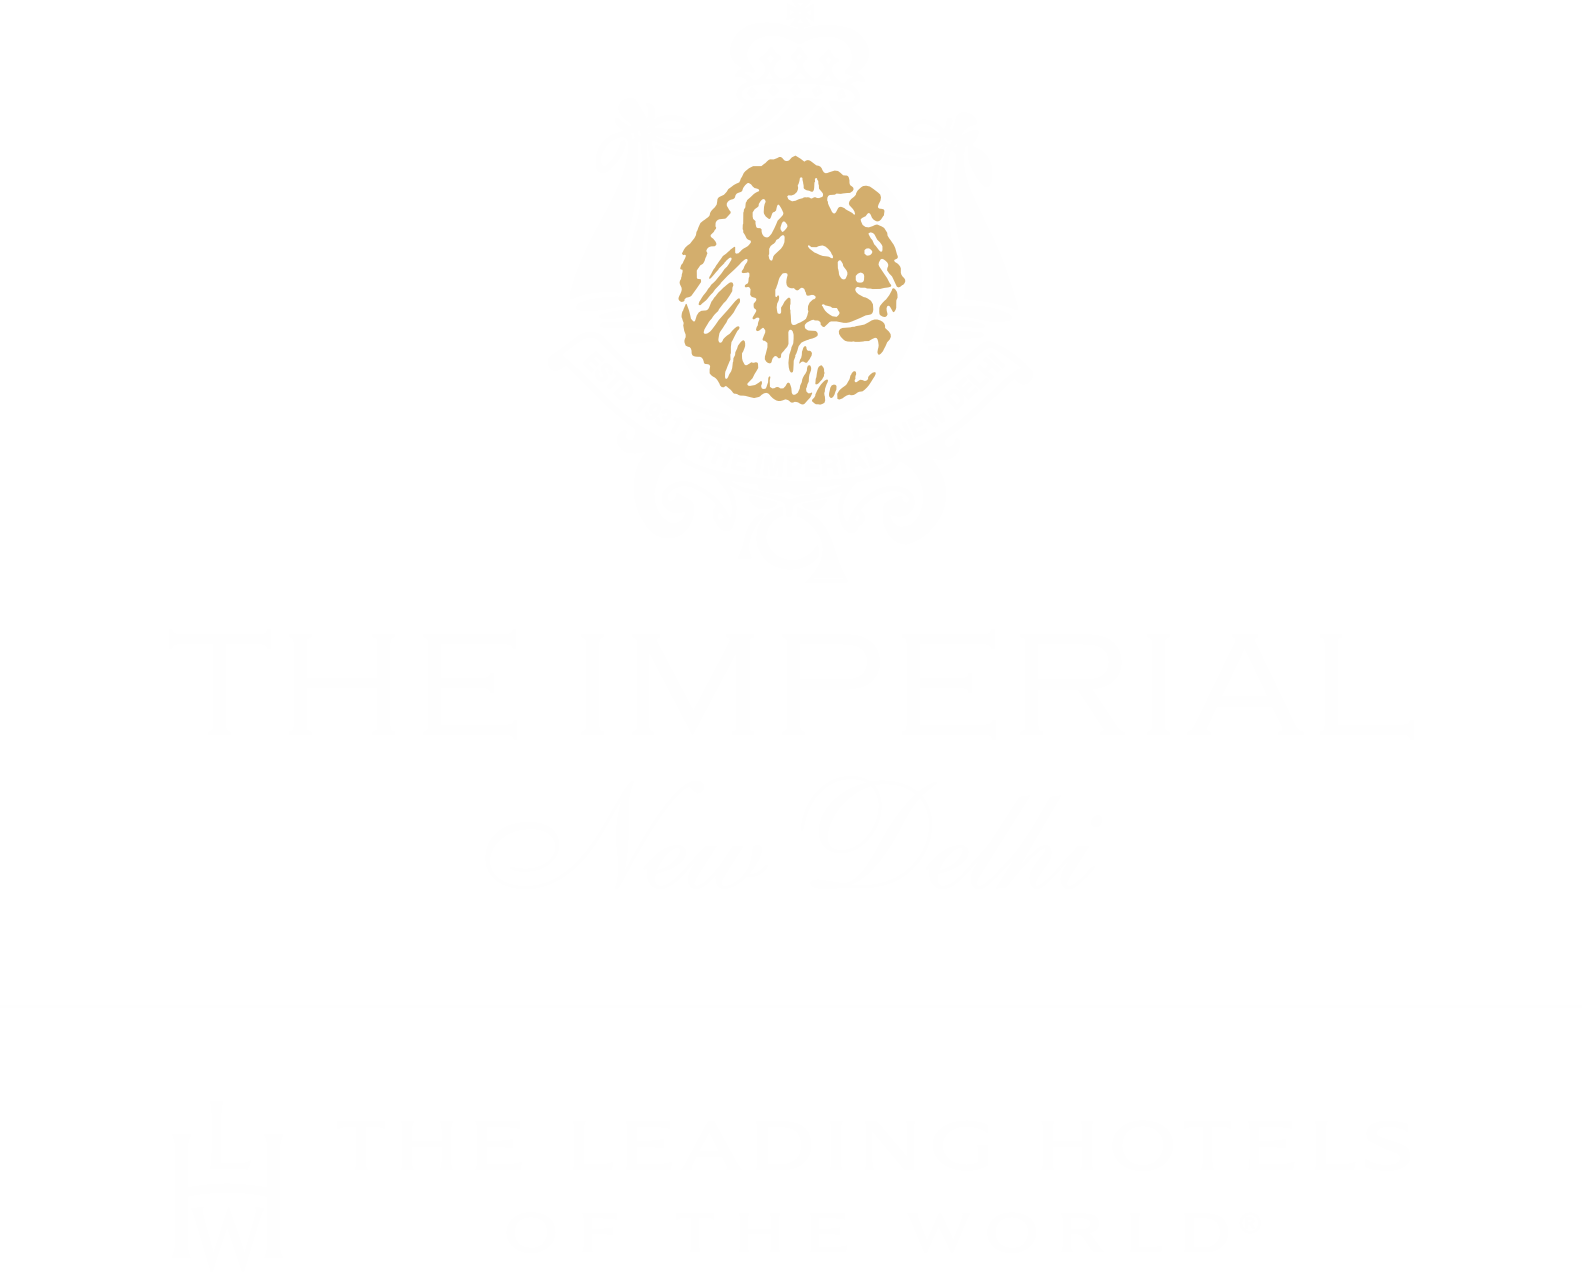 The Imperial